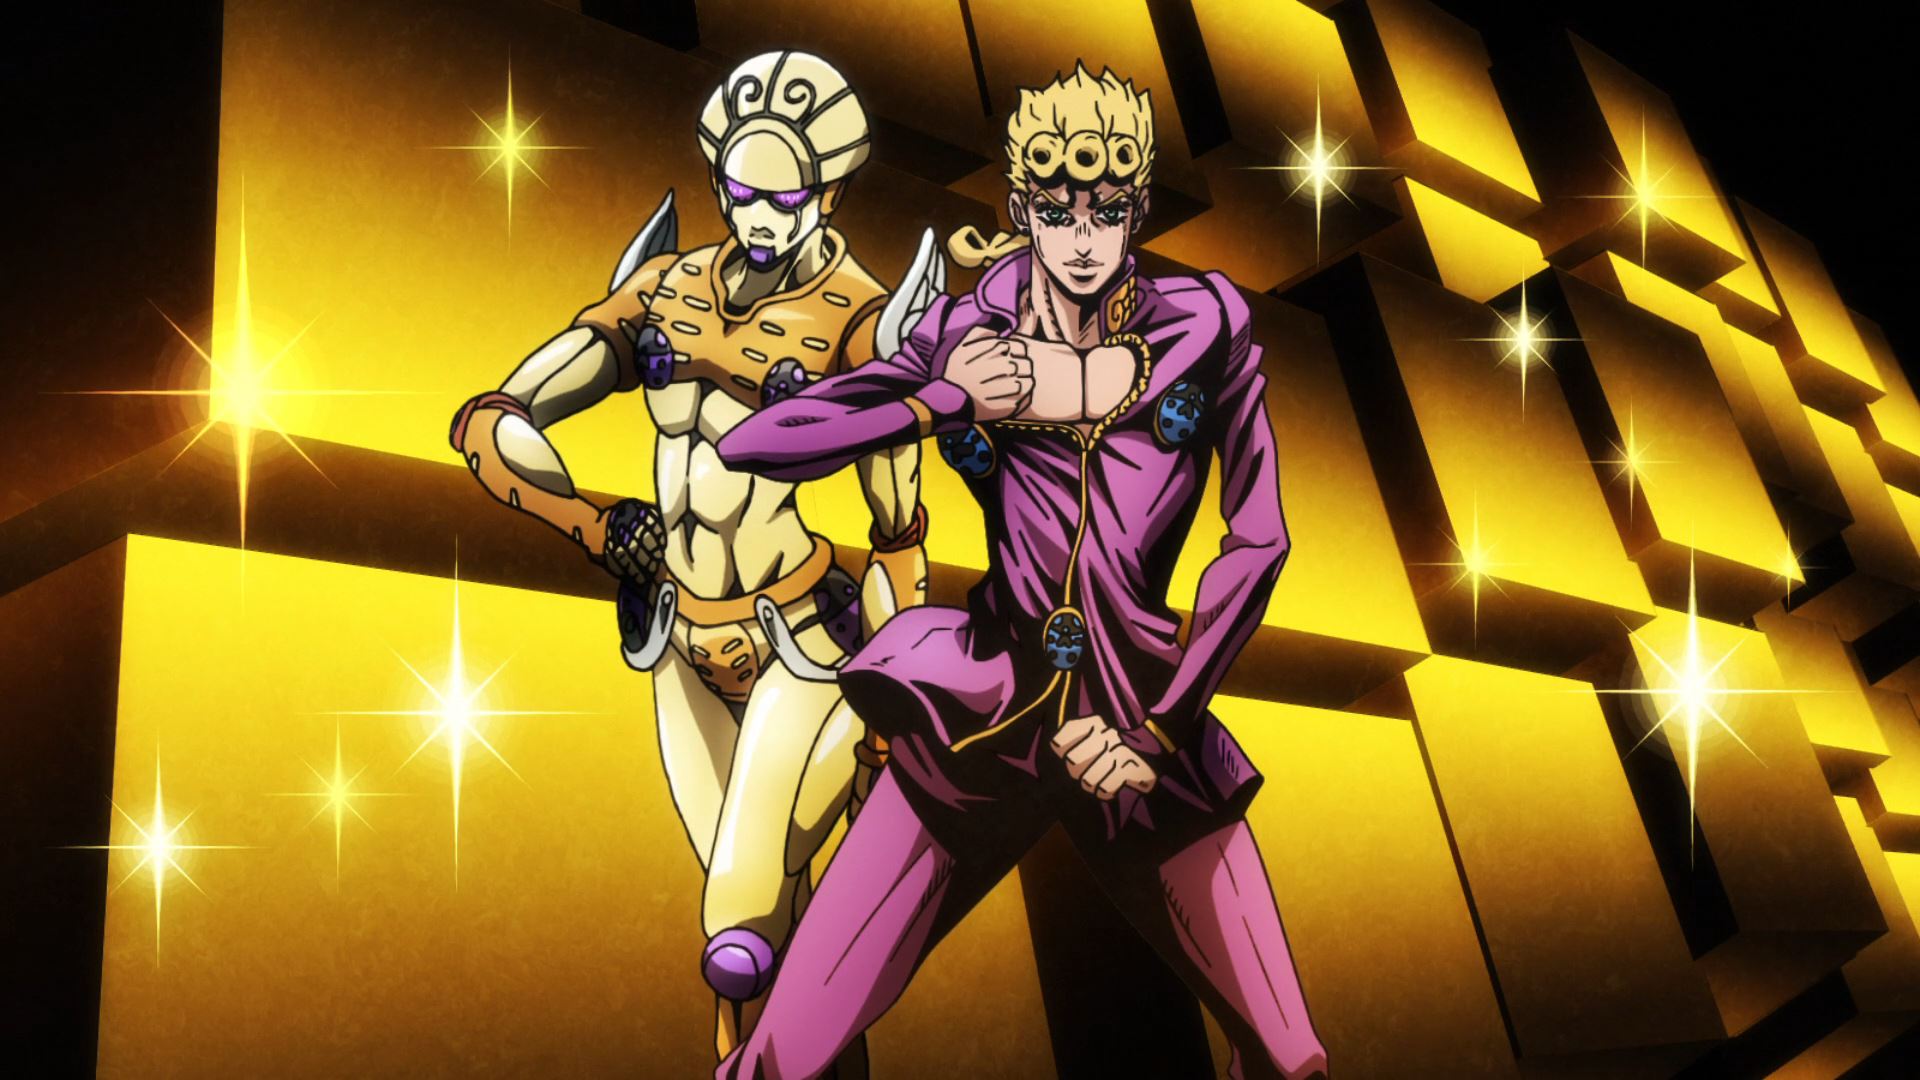 Why Should People Consider Jjba Merchandise For Buying Clothes?